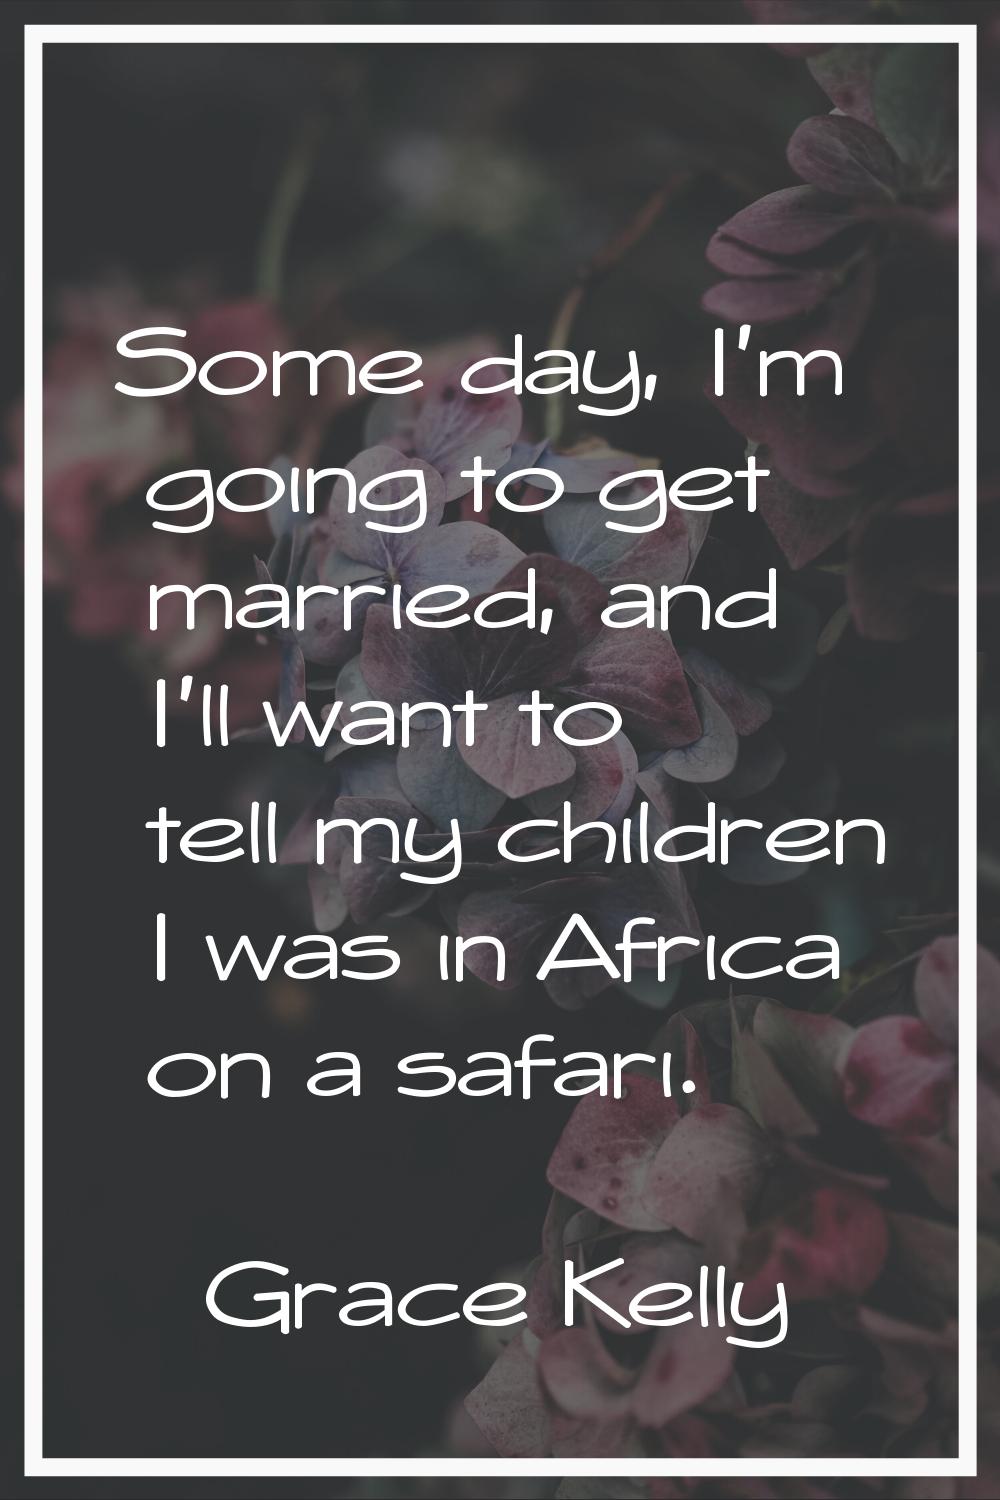 Some day, I'm going to get married, and I'll want to tell my children I was in Africa on a safari.